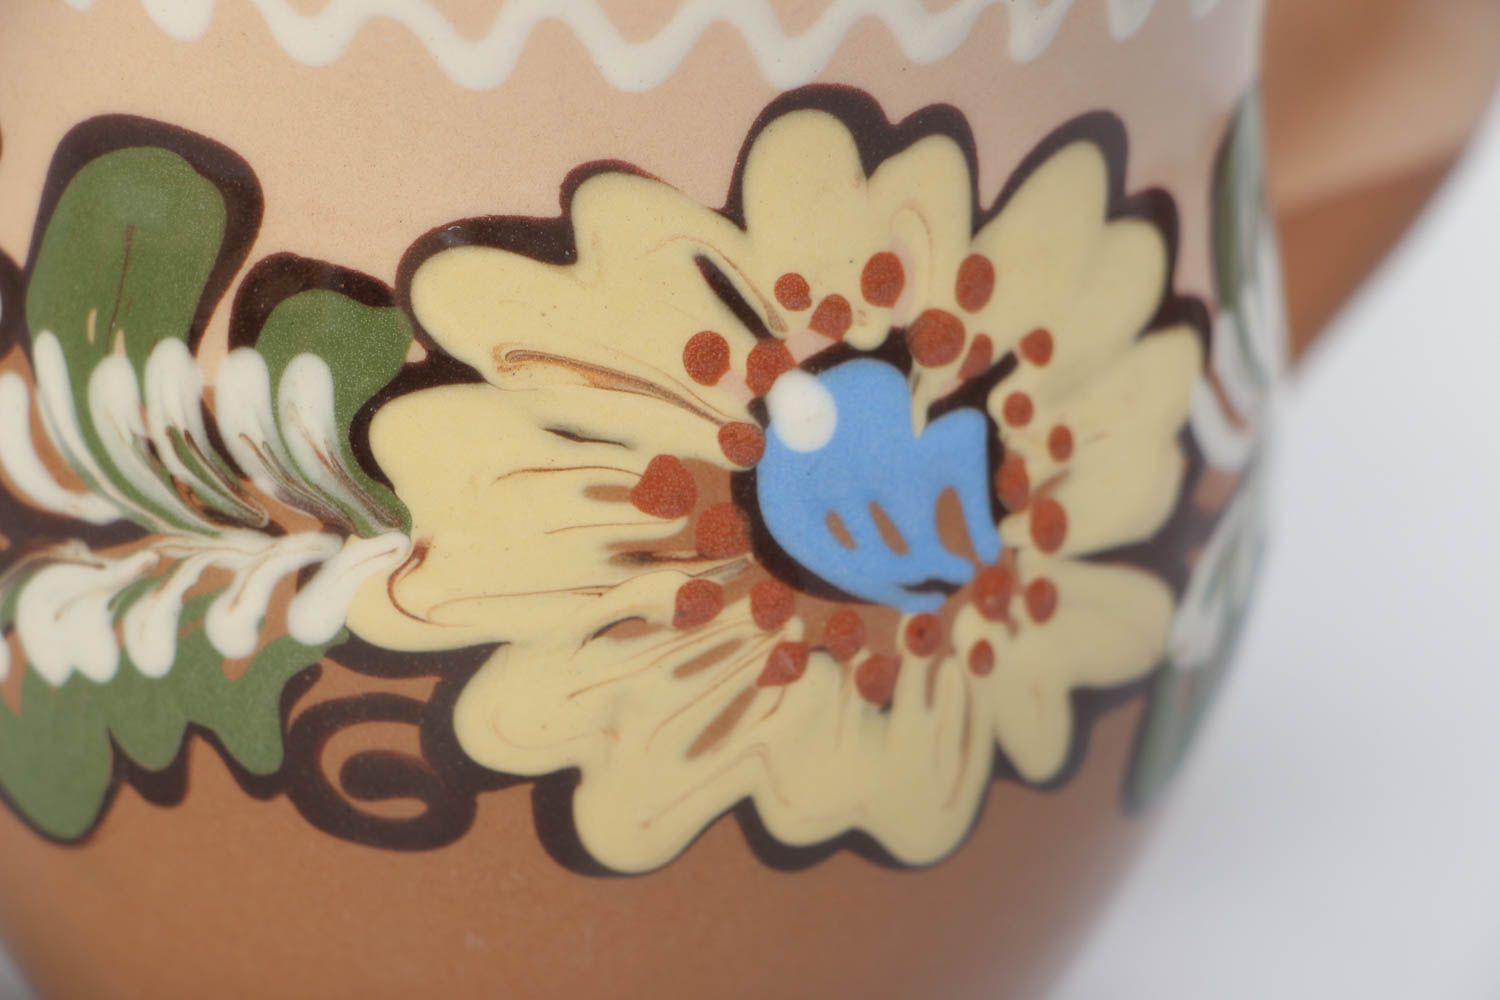 10 oz clay glazed cup with handle and floral design in brown, beige, and blue color photo 3